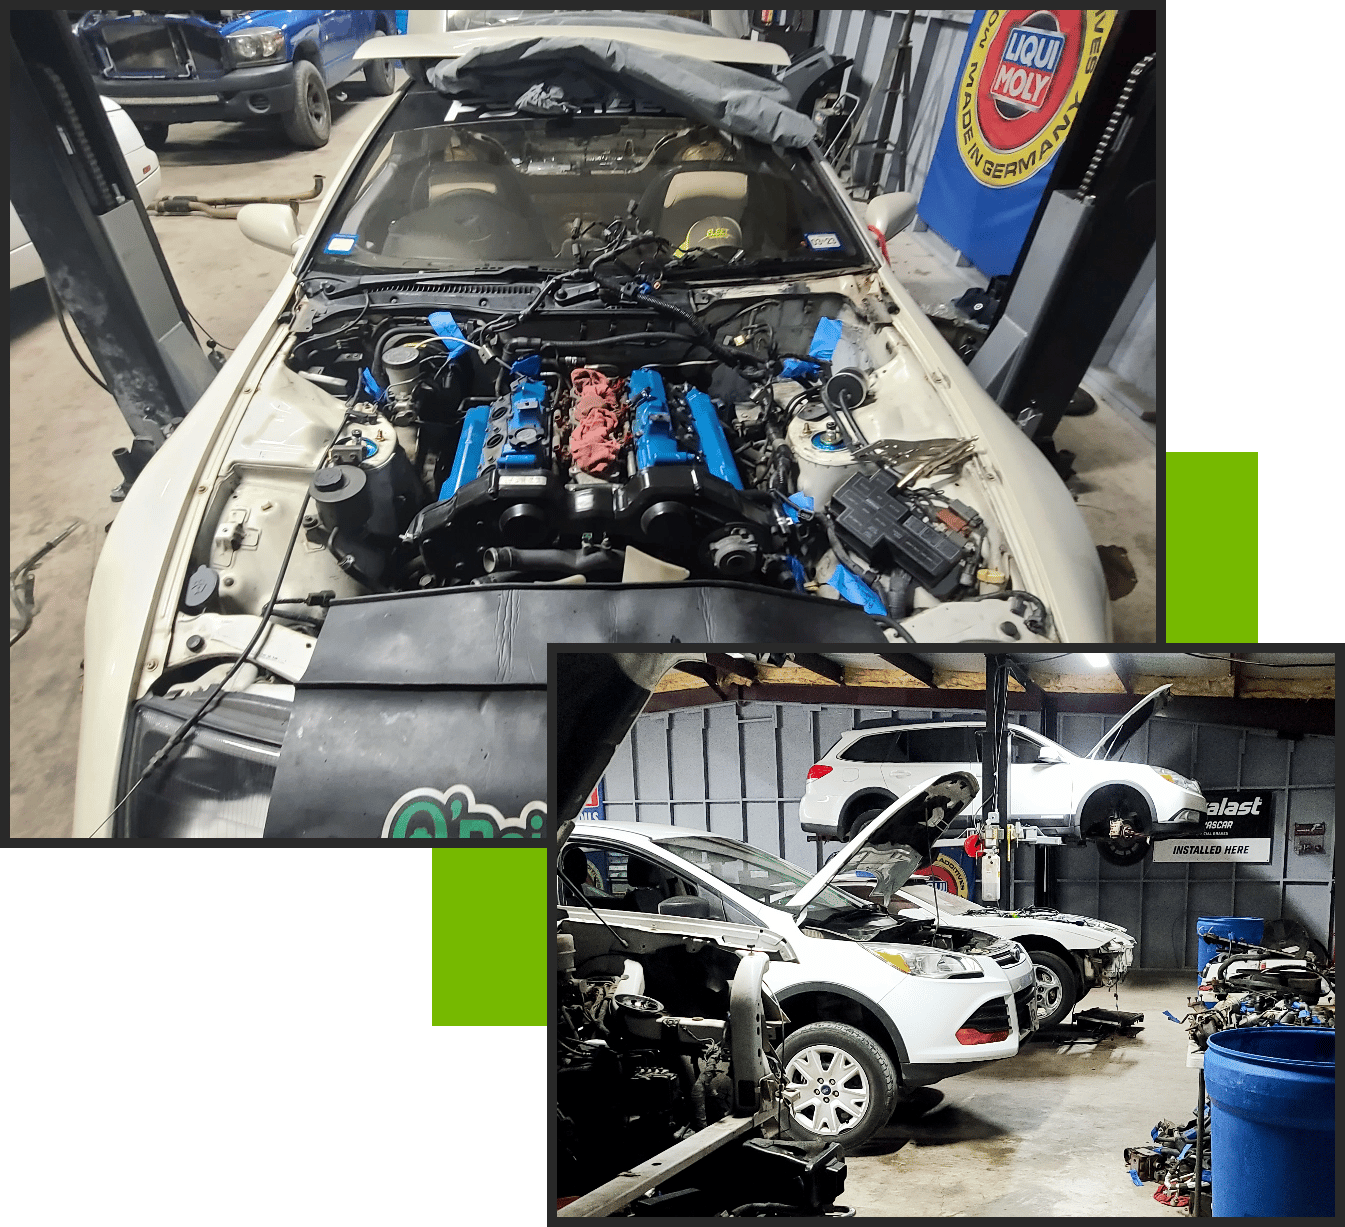 Top, image of an exposed engine and other parts of a white car in Brittni's Automotive shop. At bottom right, an image of a row of white cars for auto repair inside the shop. Concept images of auto repair at Brittni's Automotive.